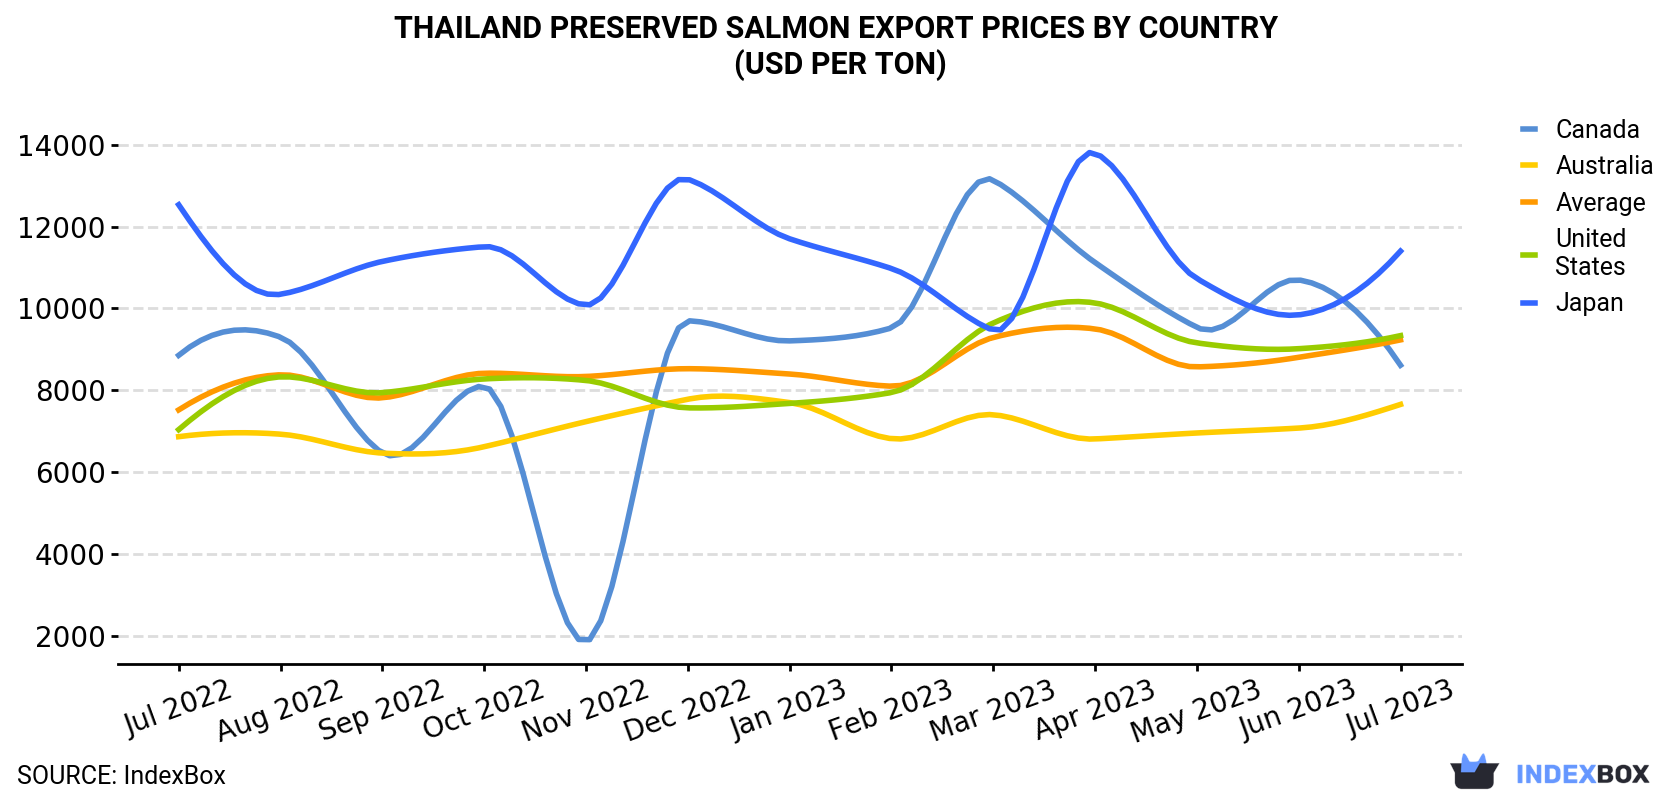 Thailand Preserved Salmon Export Prices By Country (USD Per Ton)